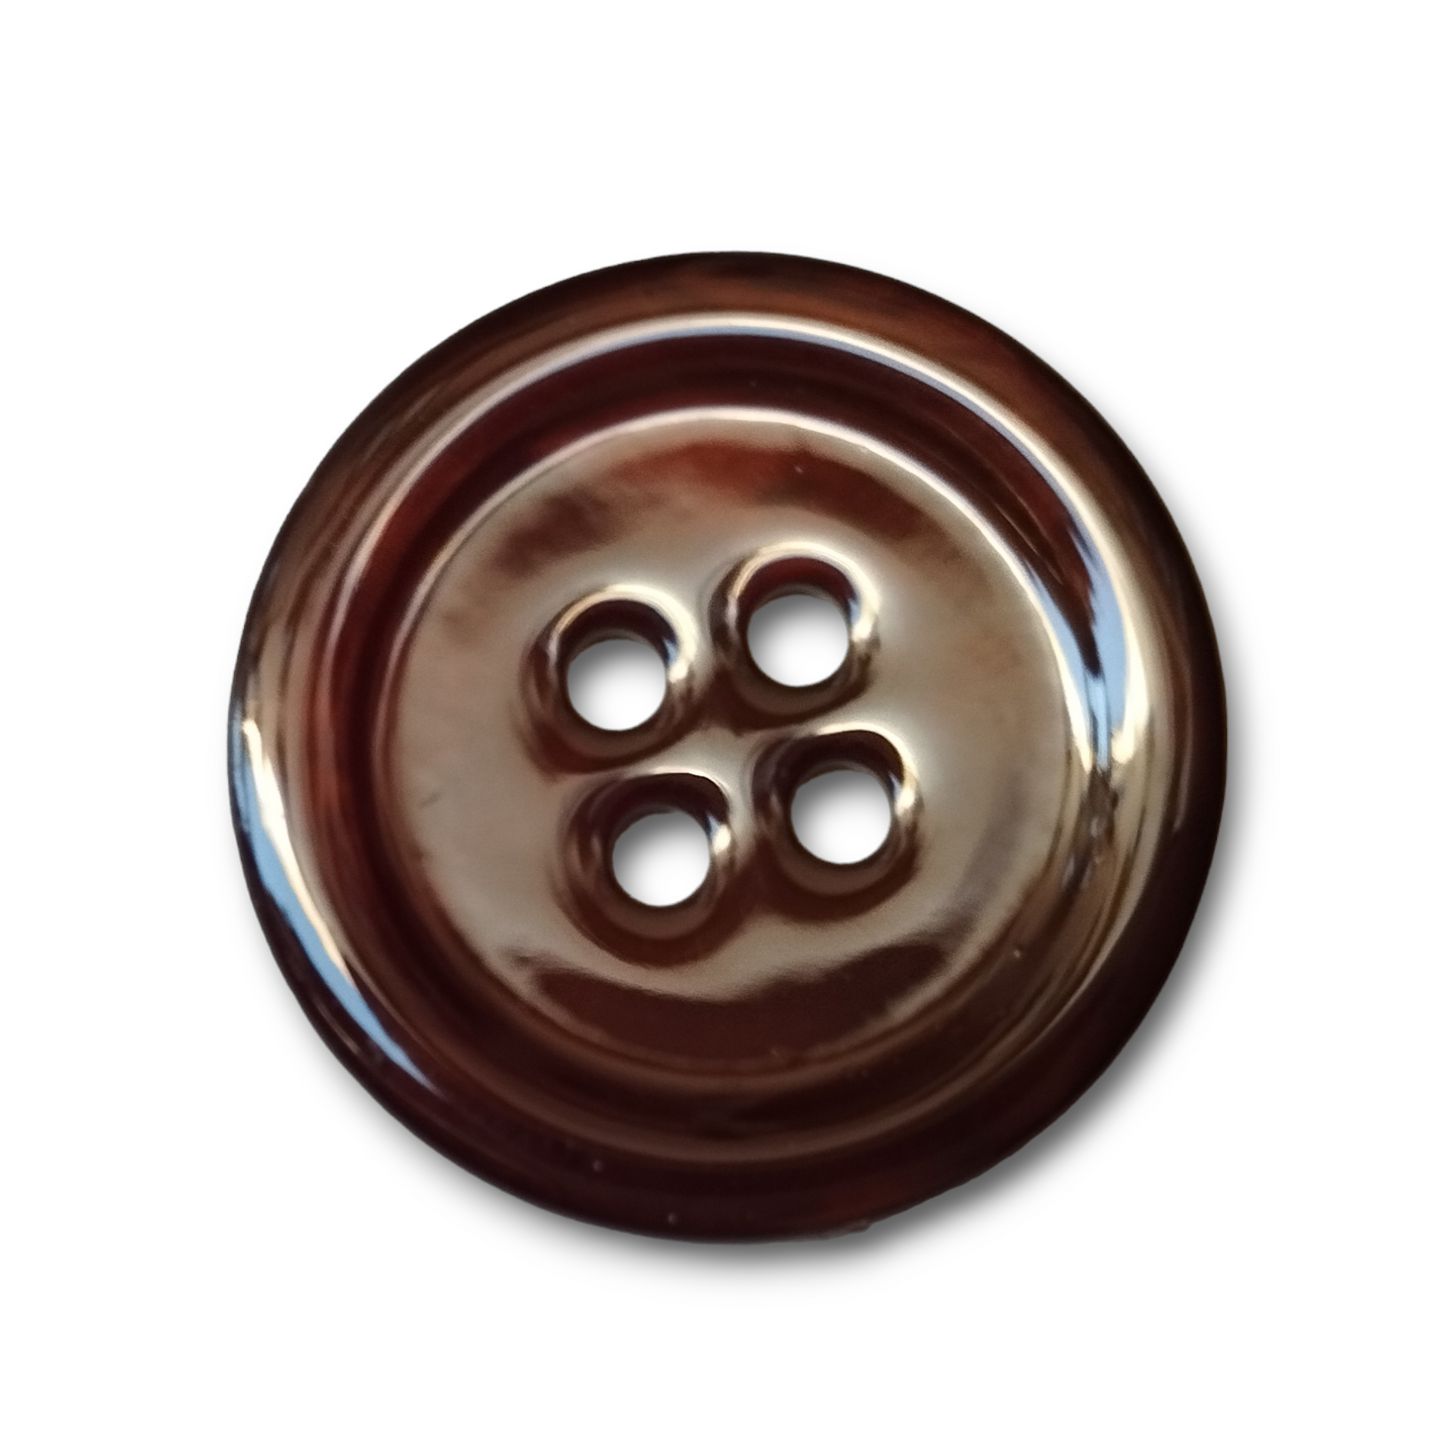 Mother of pearl buttons for men in many colors for jackets and suits